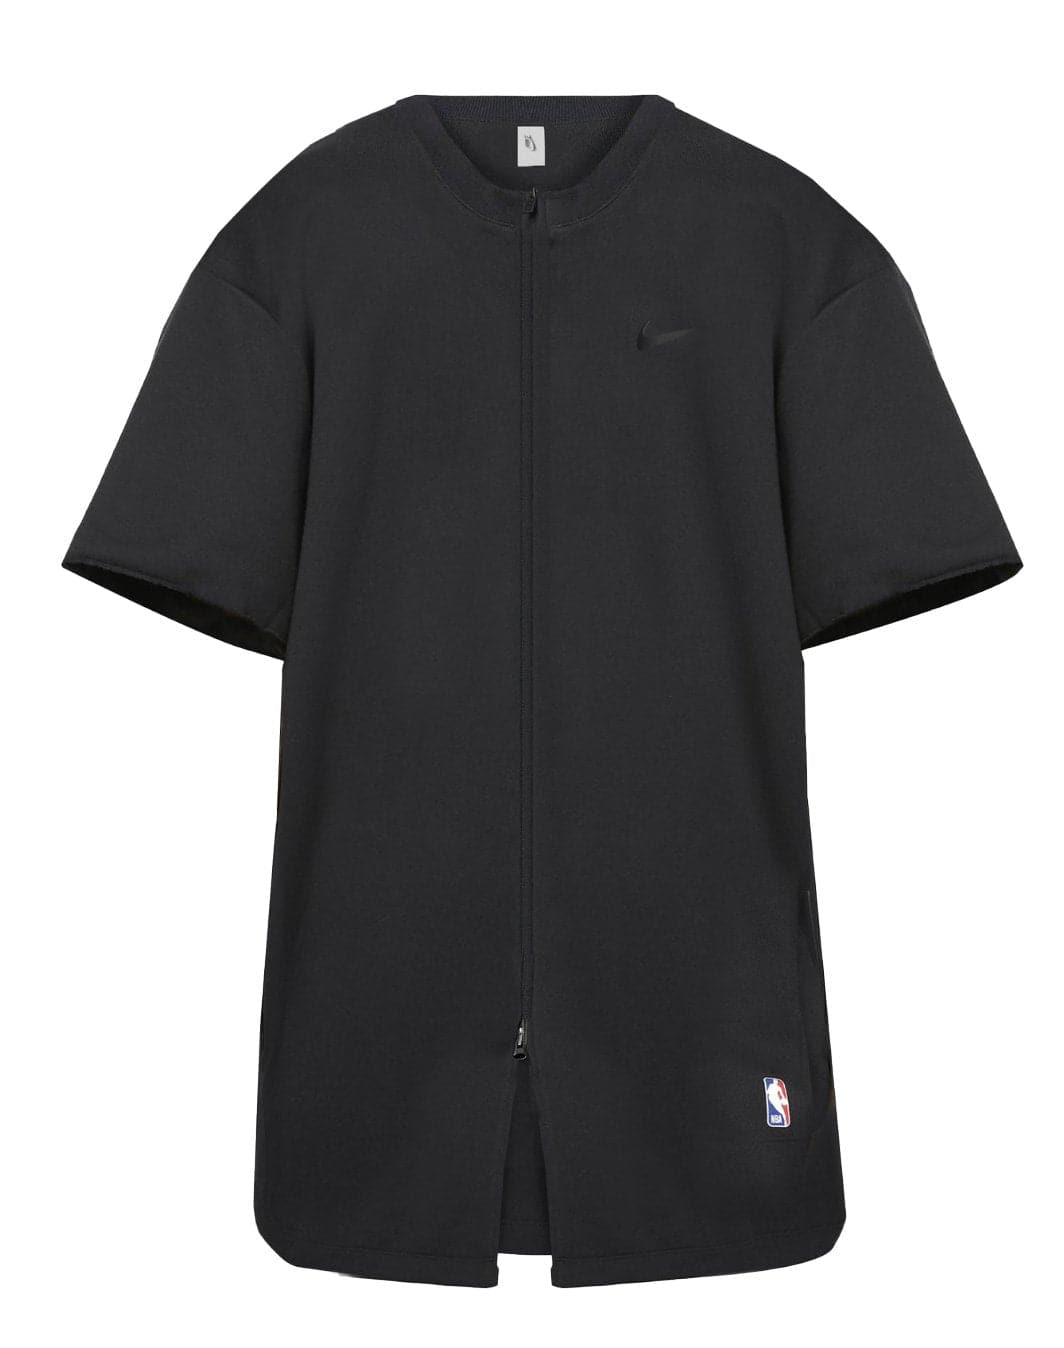 FEAR OF GOD X NIKE WARM UP TOP (BLACK) (PRE-OWNED) - The Magnolia Park